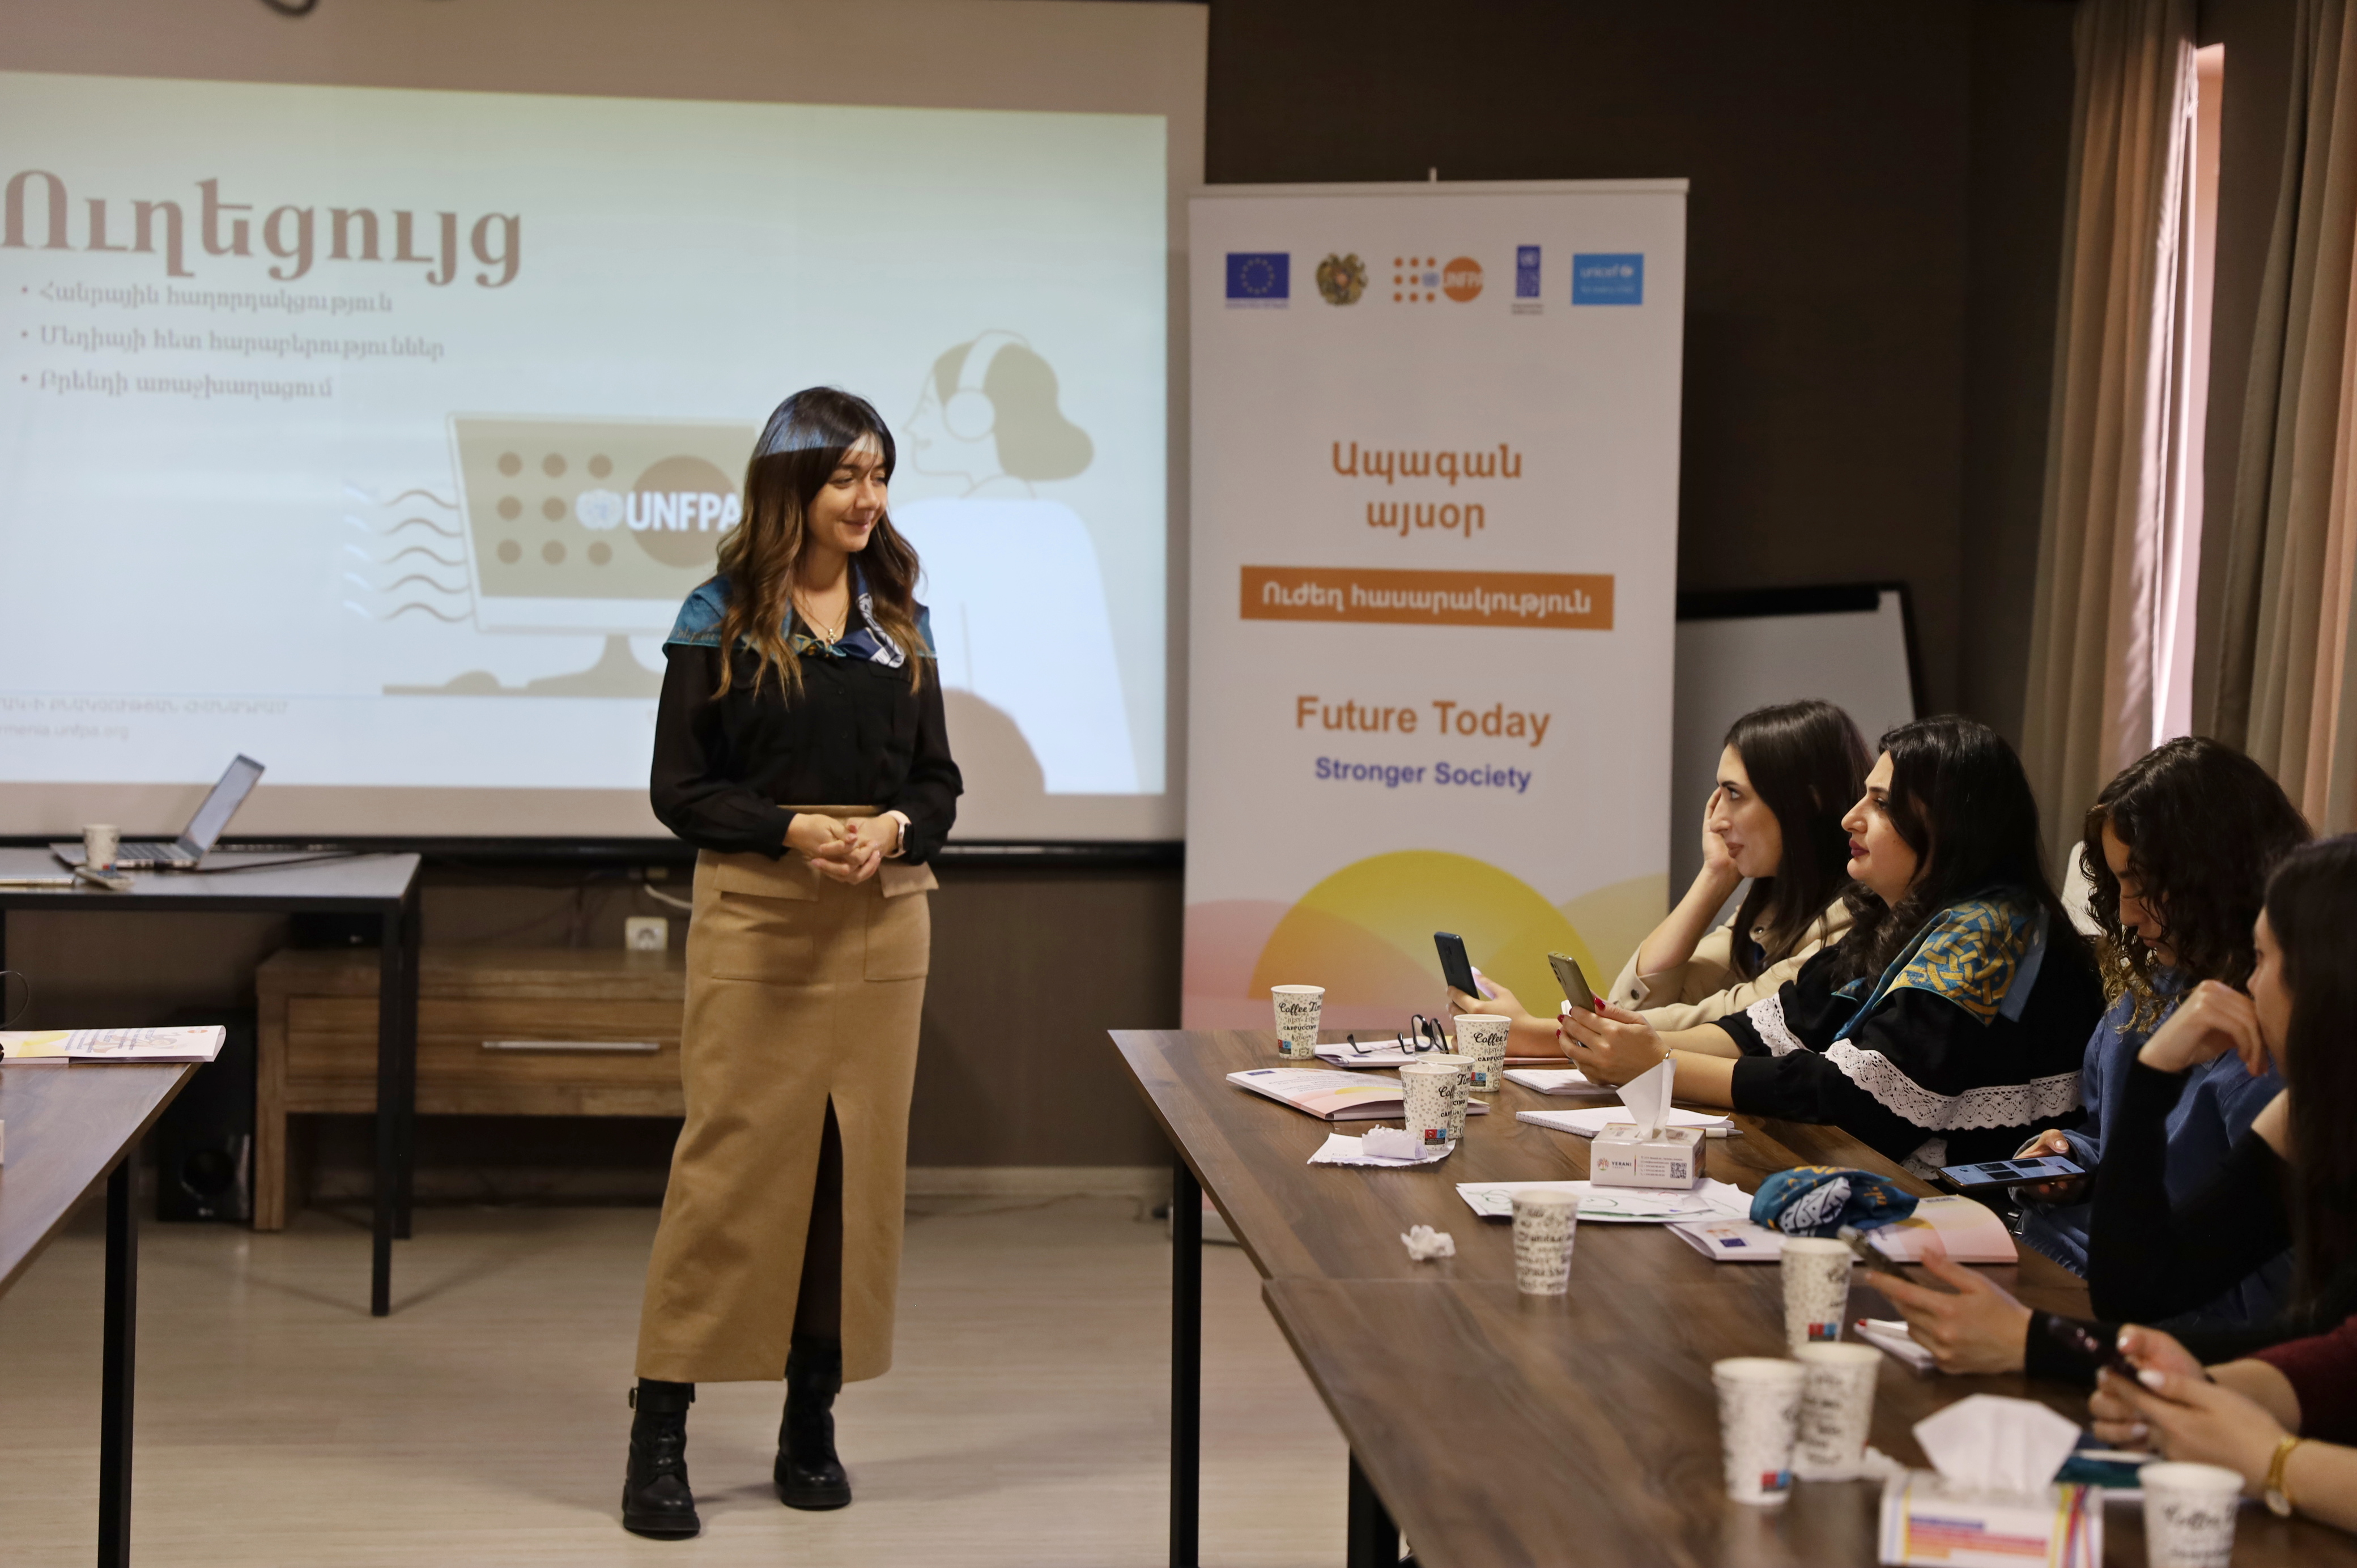 Photo featuring Mari Mkhitaryan, UNFPA Armenia Communications Consultant, leading a workshop on Media and Public Communications